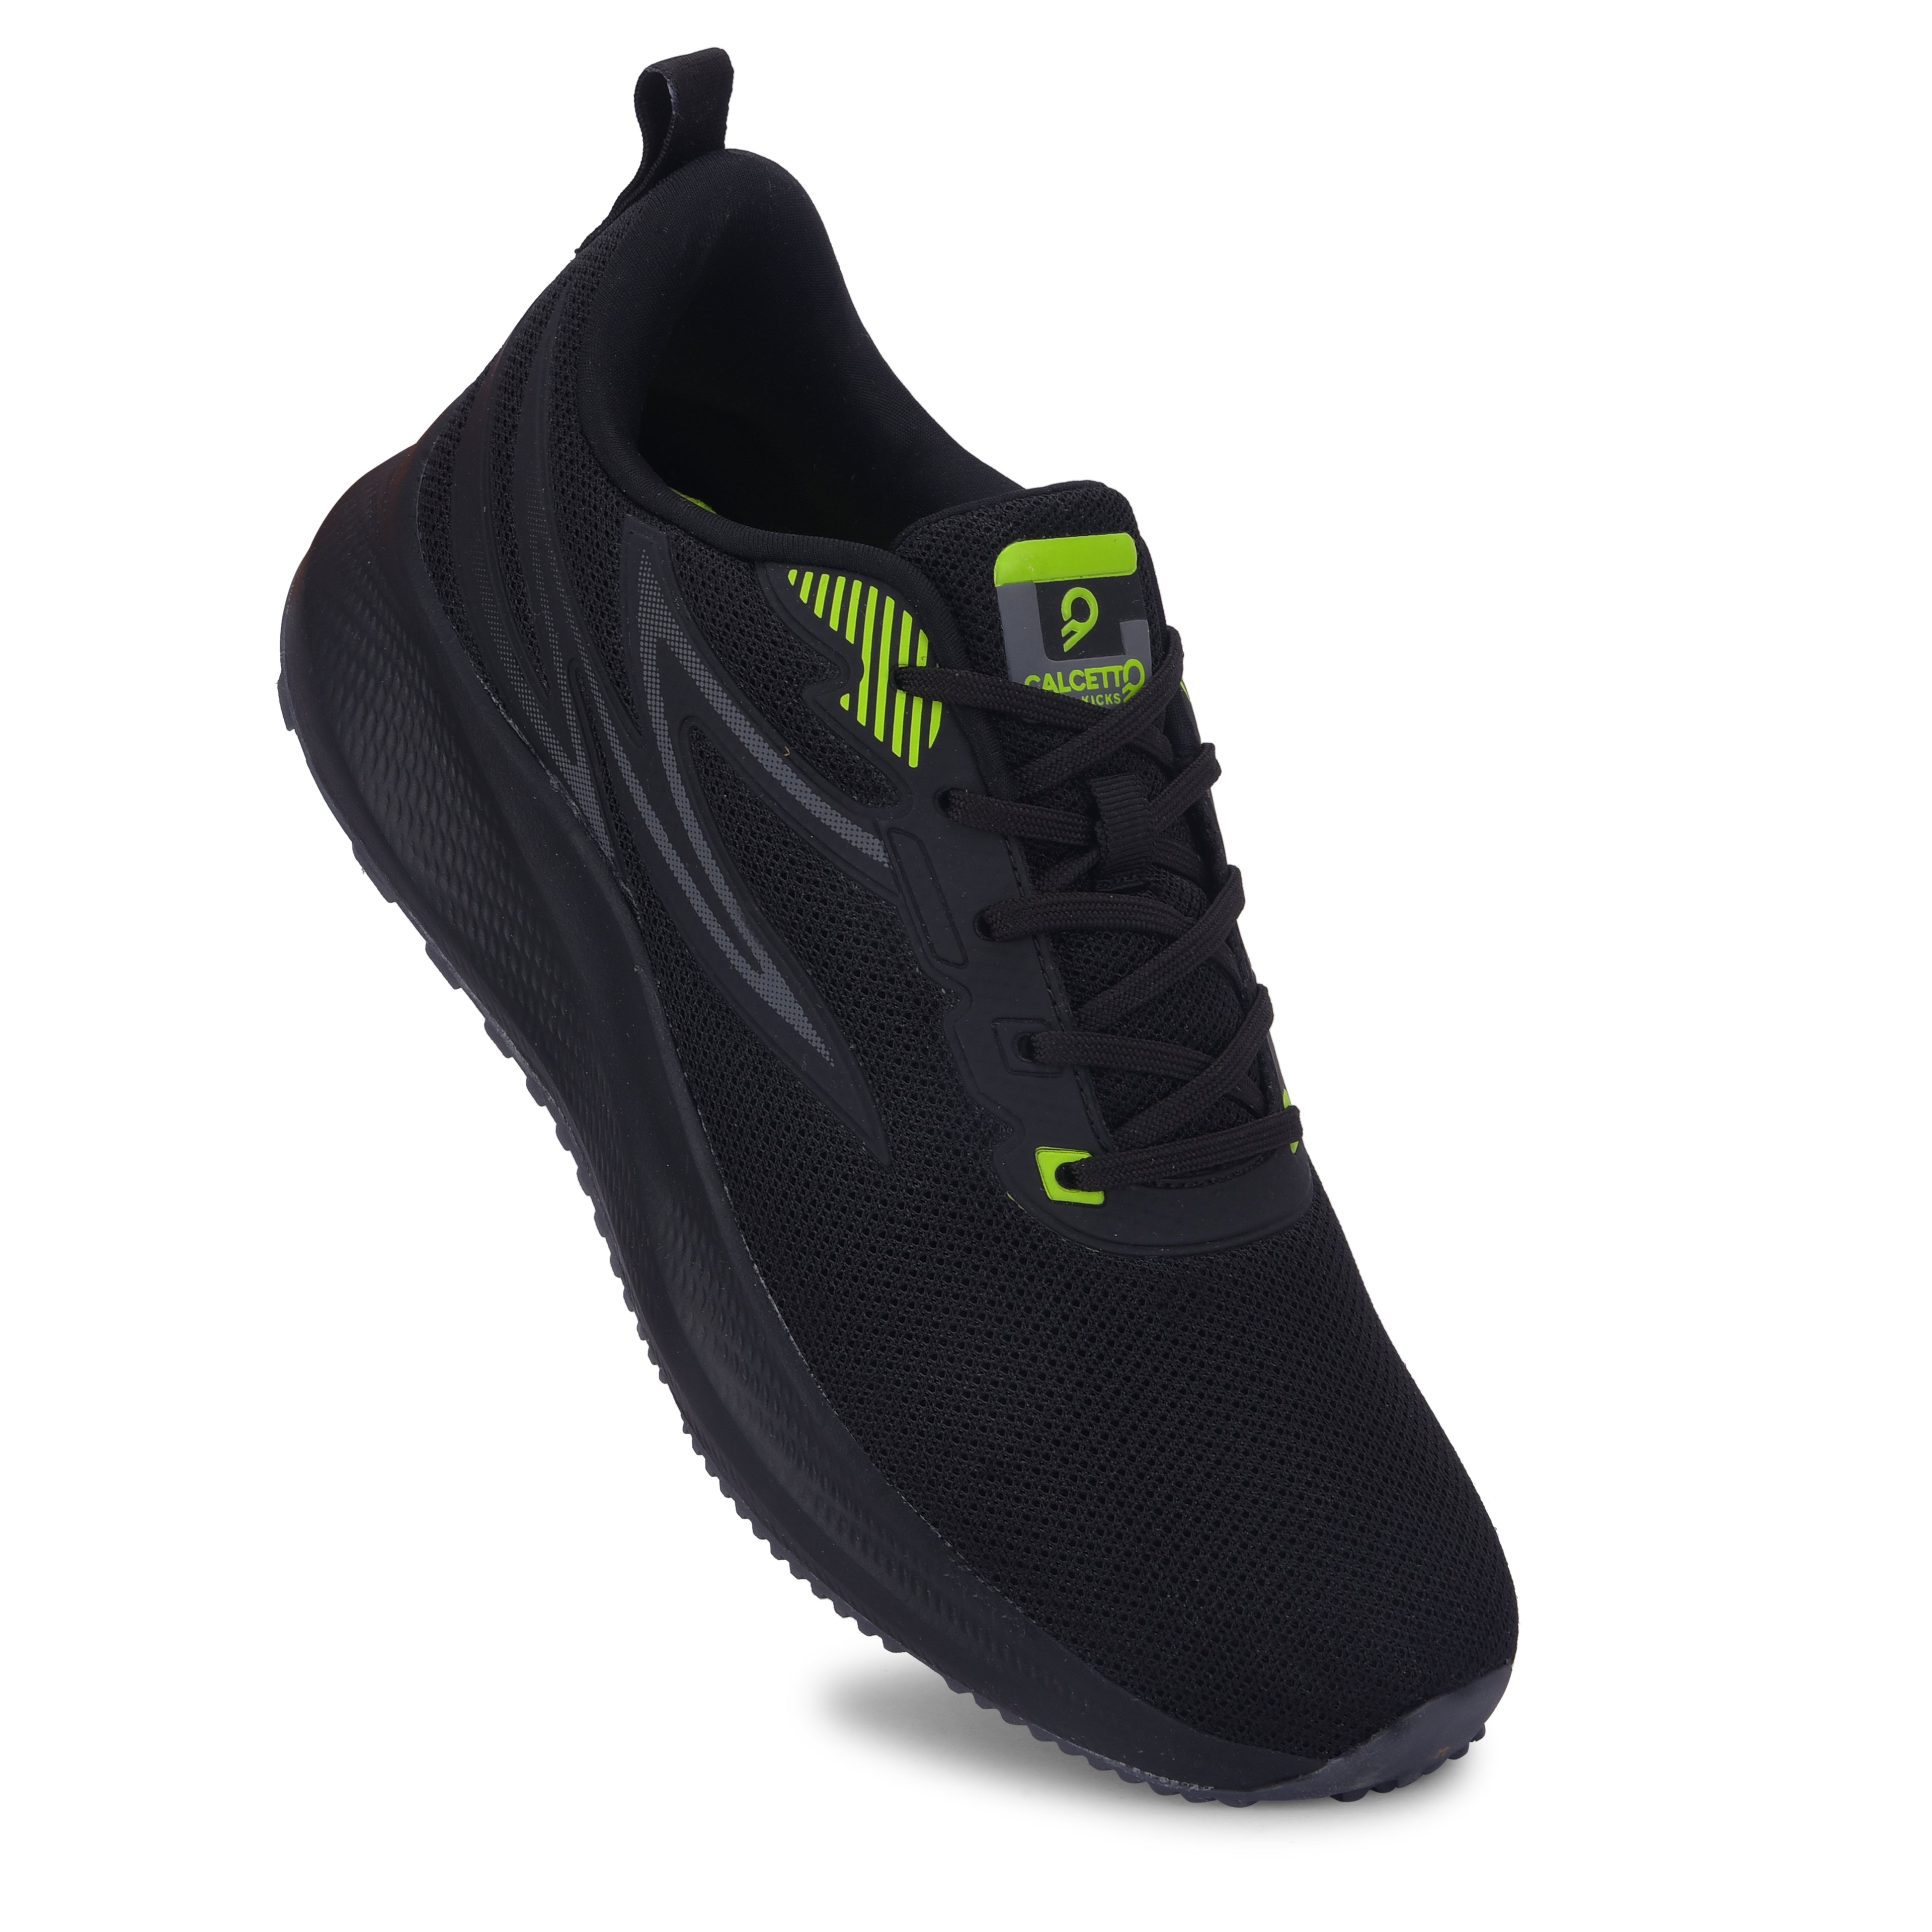 Calcetto CLT-2011 Black Running Sports Shoes For Men